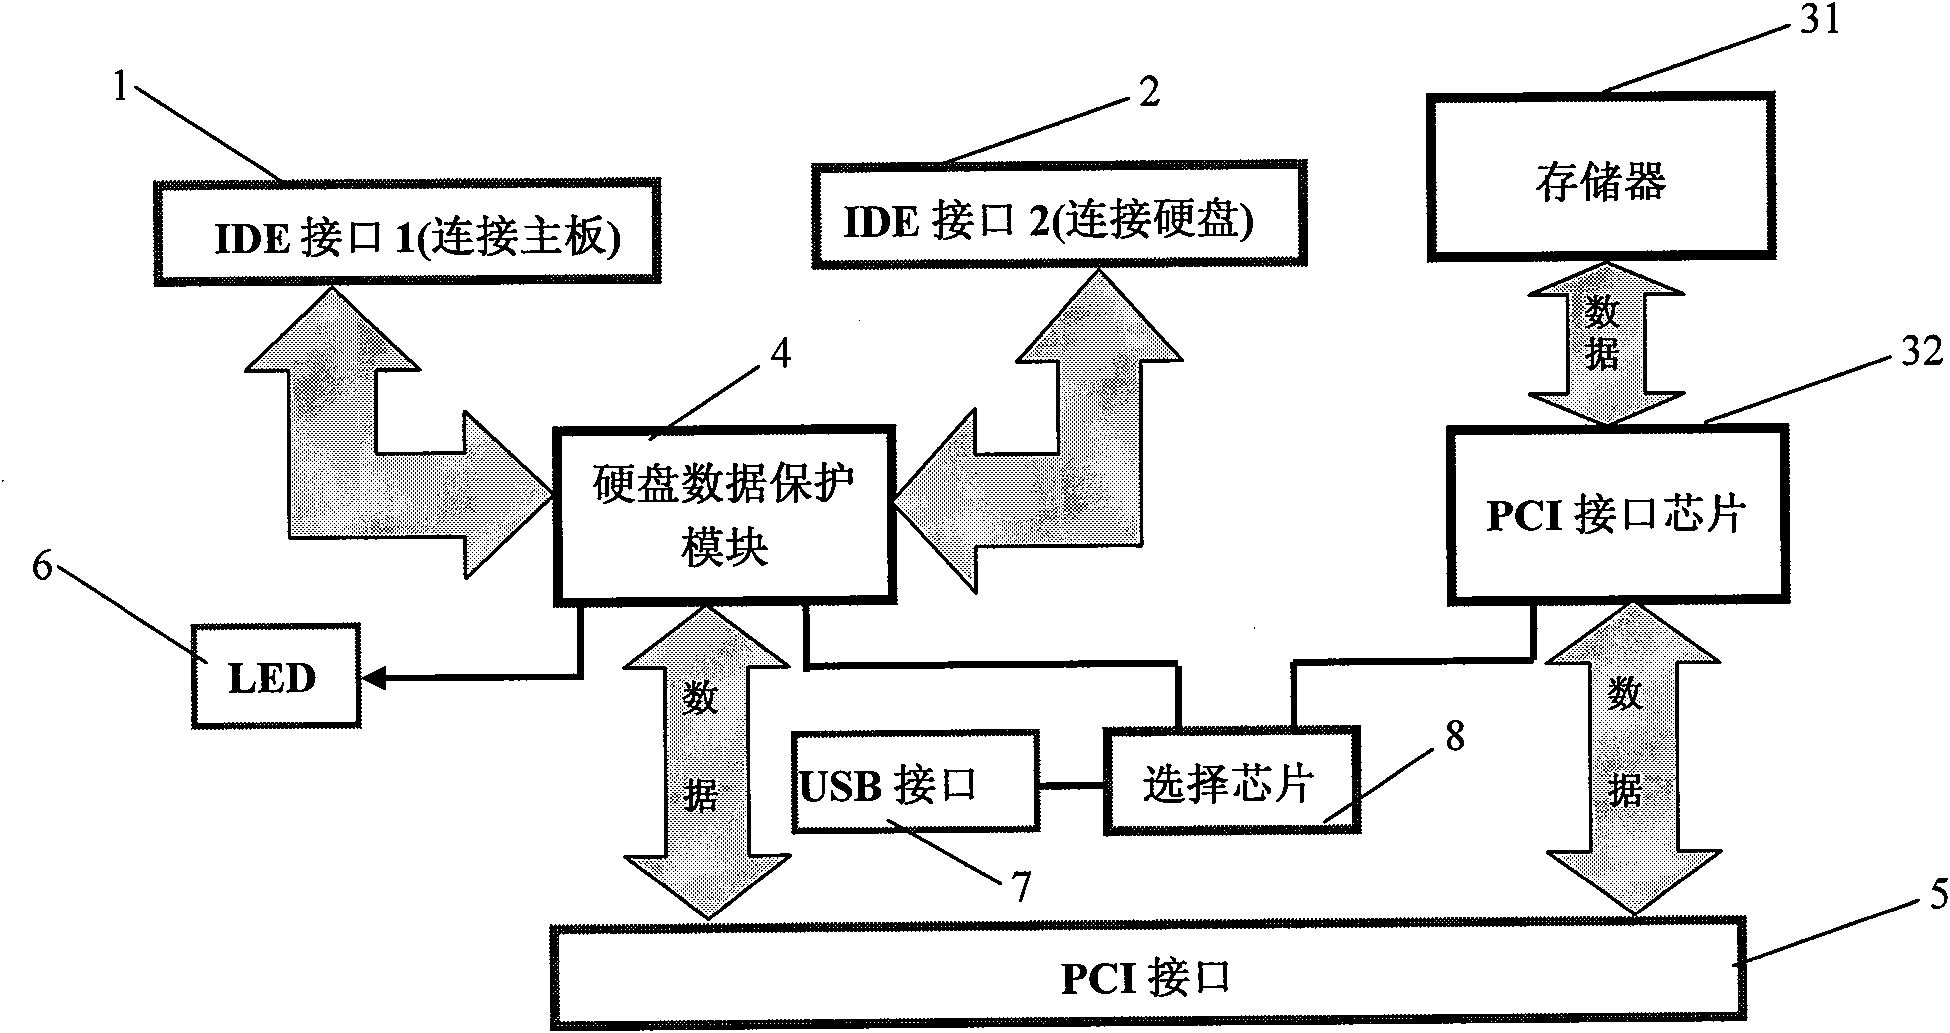 Computer security apparatus and method